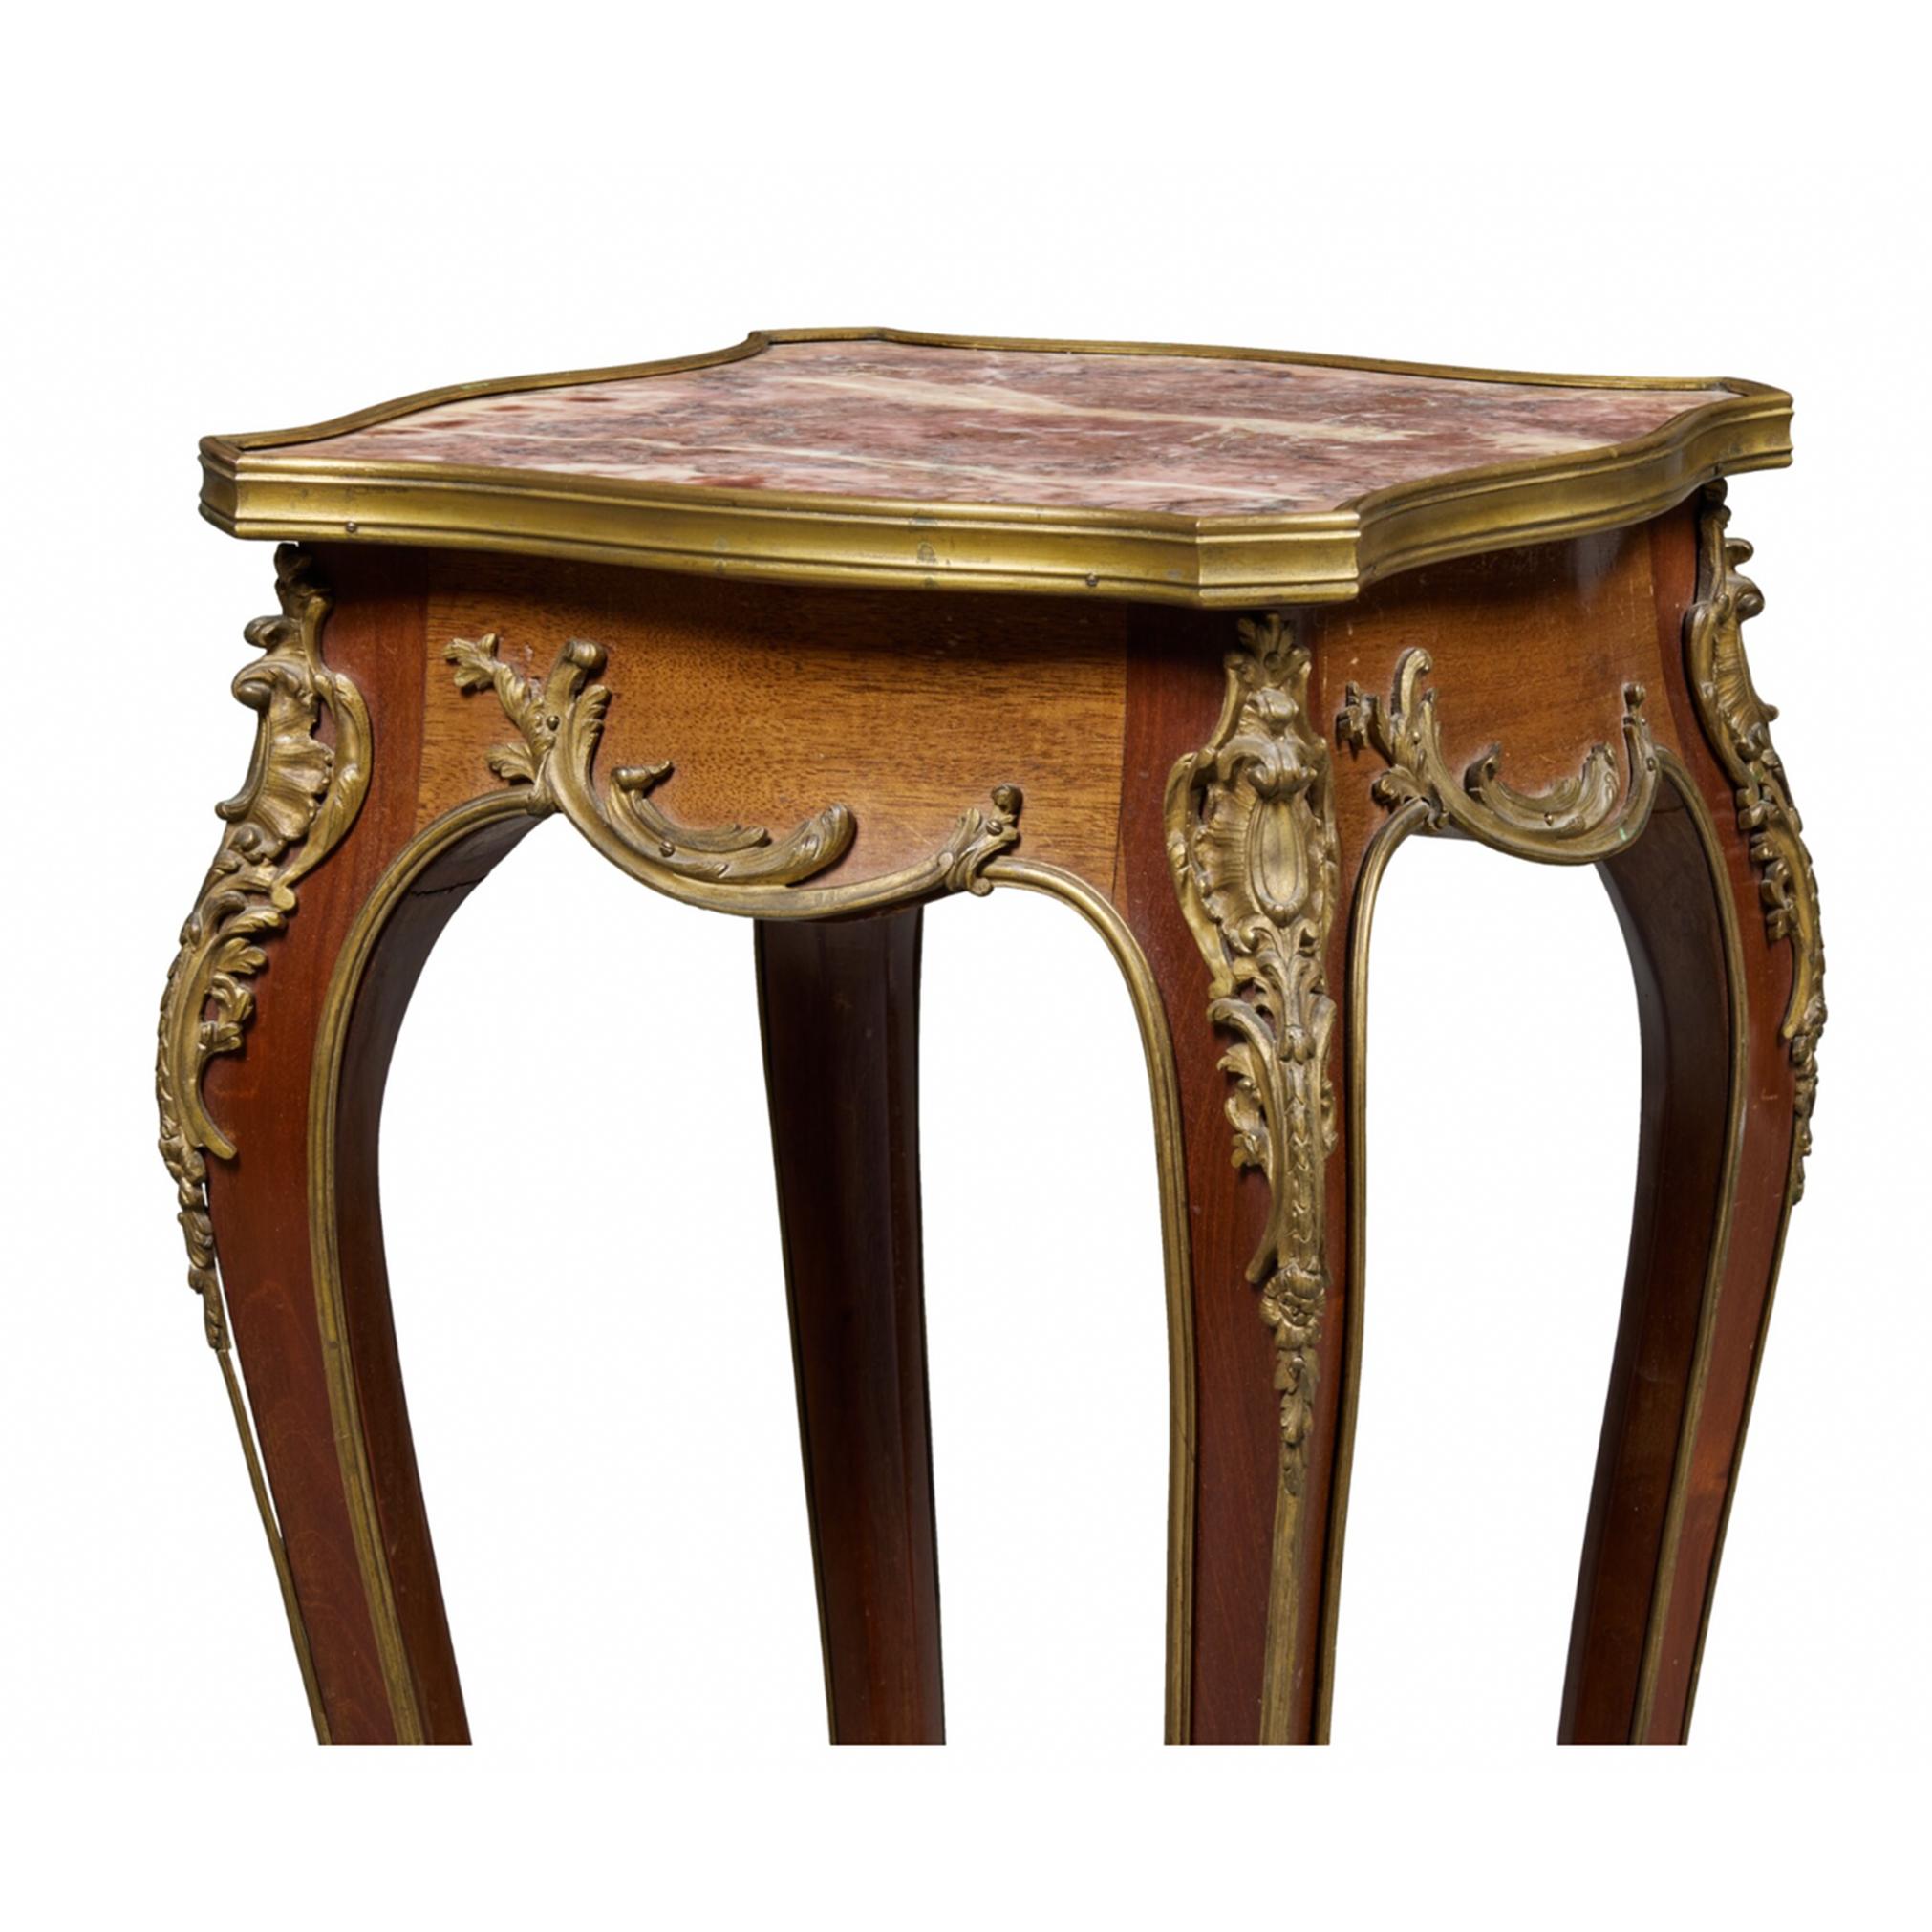 French Louis XV Style Gilt-Bronze Mounted Mahogany and Bois Satiné Square Side Table